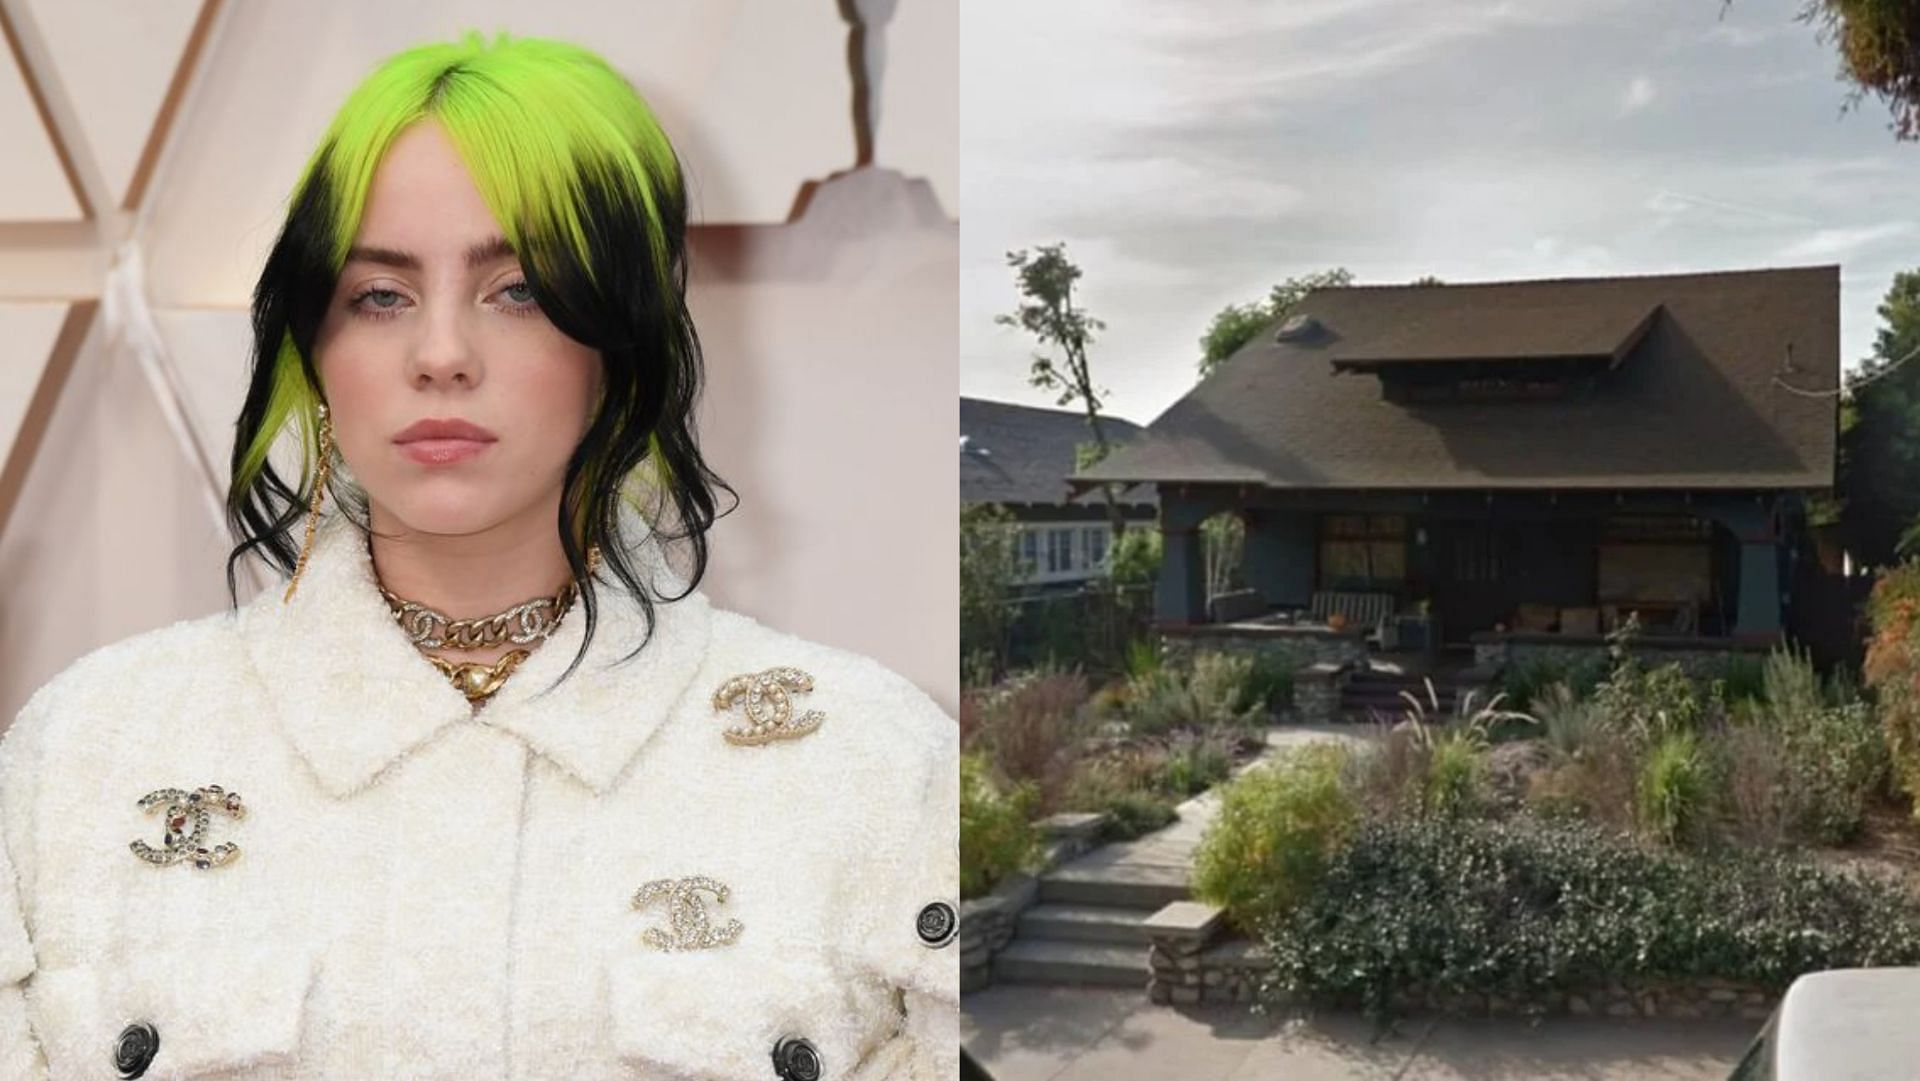 Billie Eilish, who secretly owns a $2.3 million house in Glendale, suffered a burglary in her childhood home in Highland Park, Los Angeles, on Thursday. (Image via Getty Images, velvetropes.com)